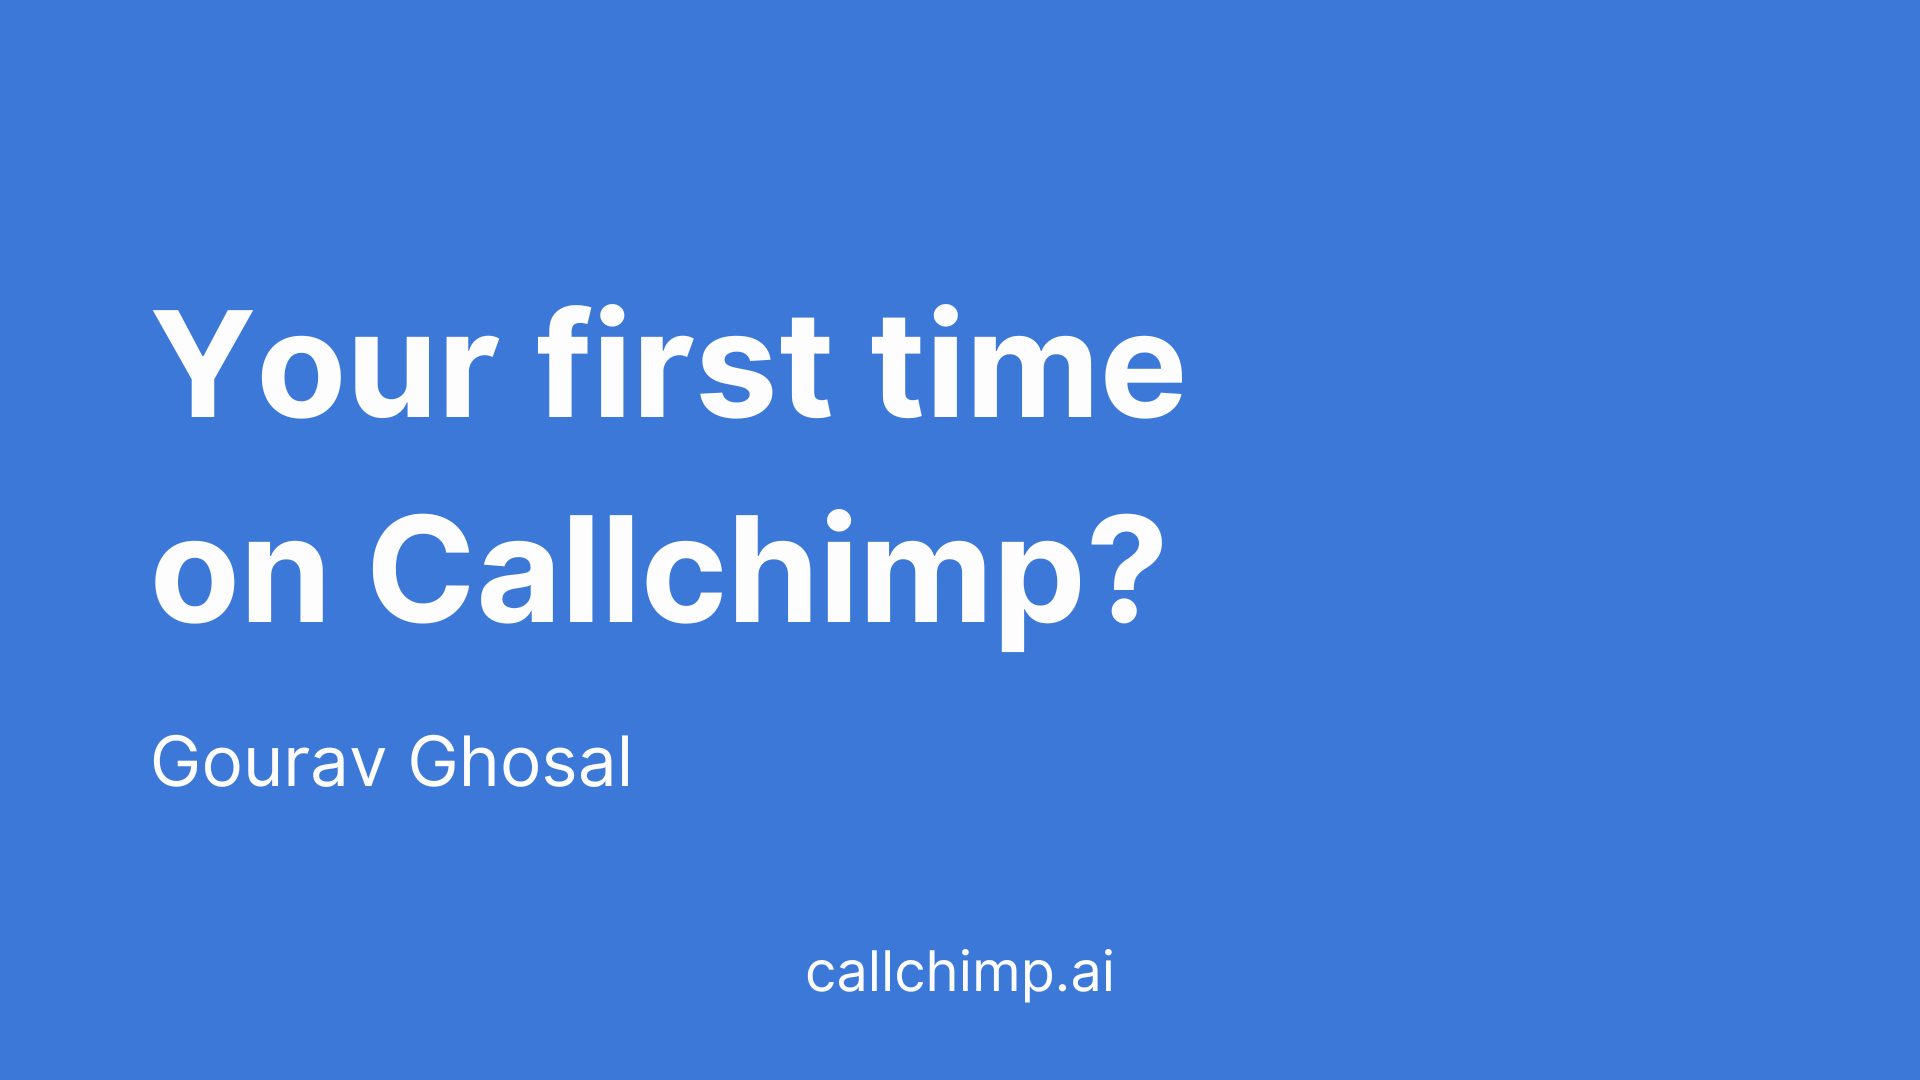 Your first time on Callchimp?